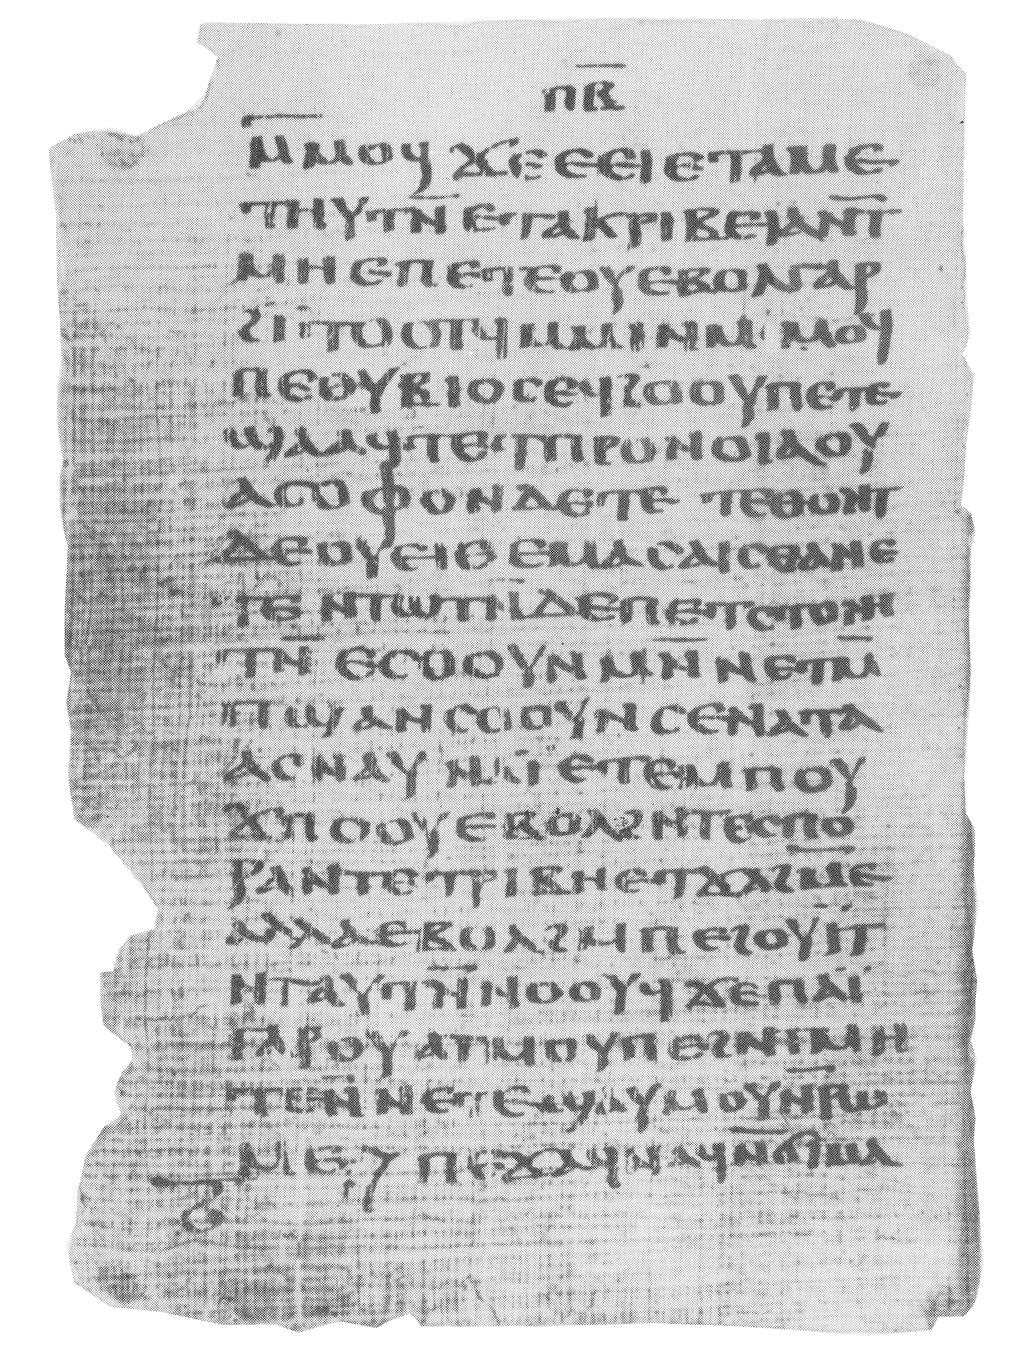 slation at the beginning of the Berlin Papyrus 8502 (a.k.a. the Akhmim Codex, 400s CE), that ﬁrst surfaced in